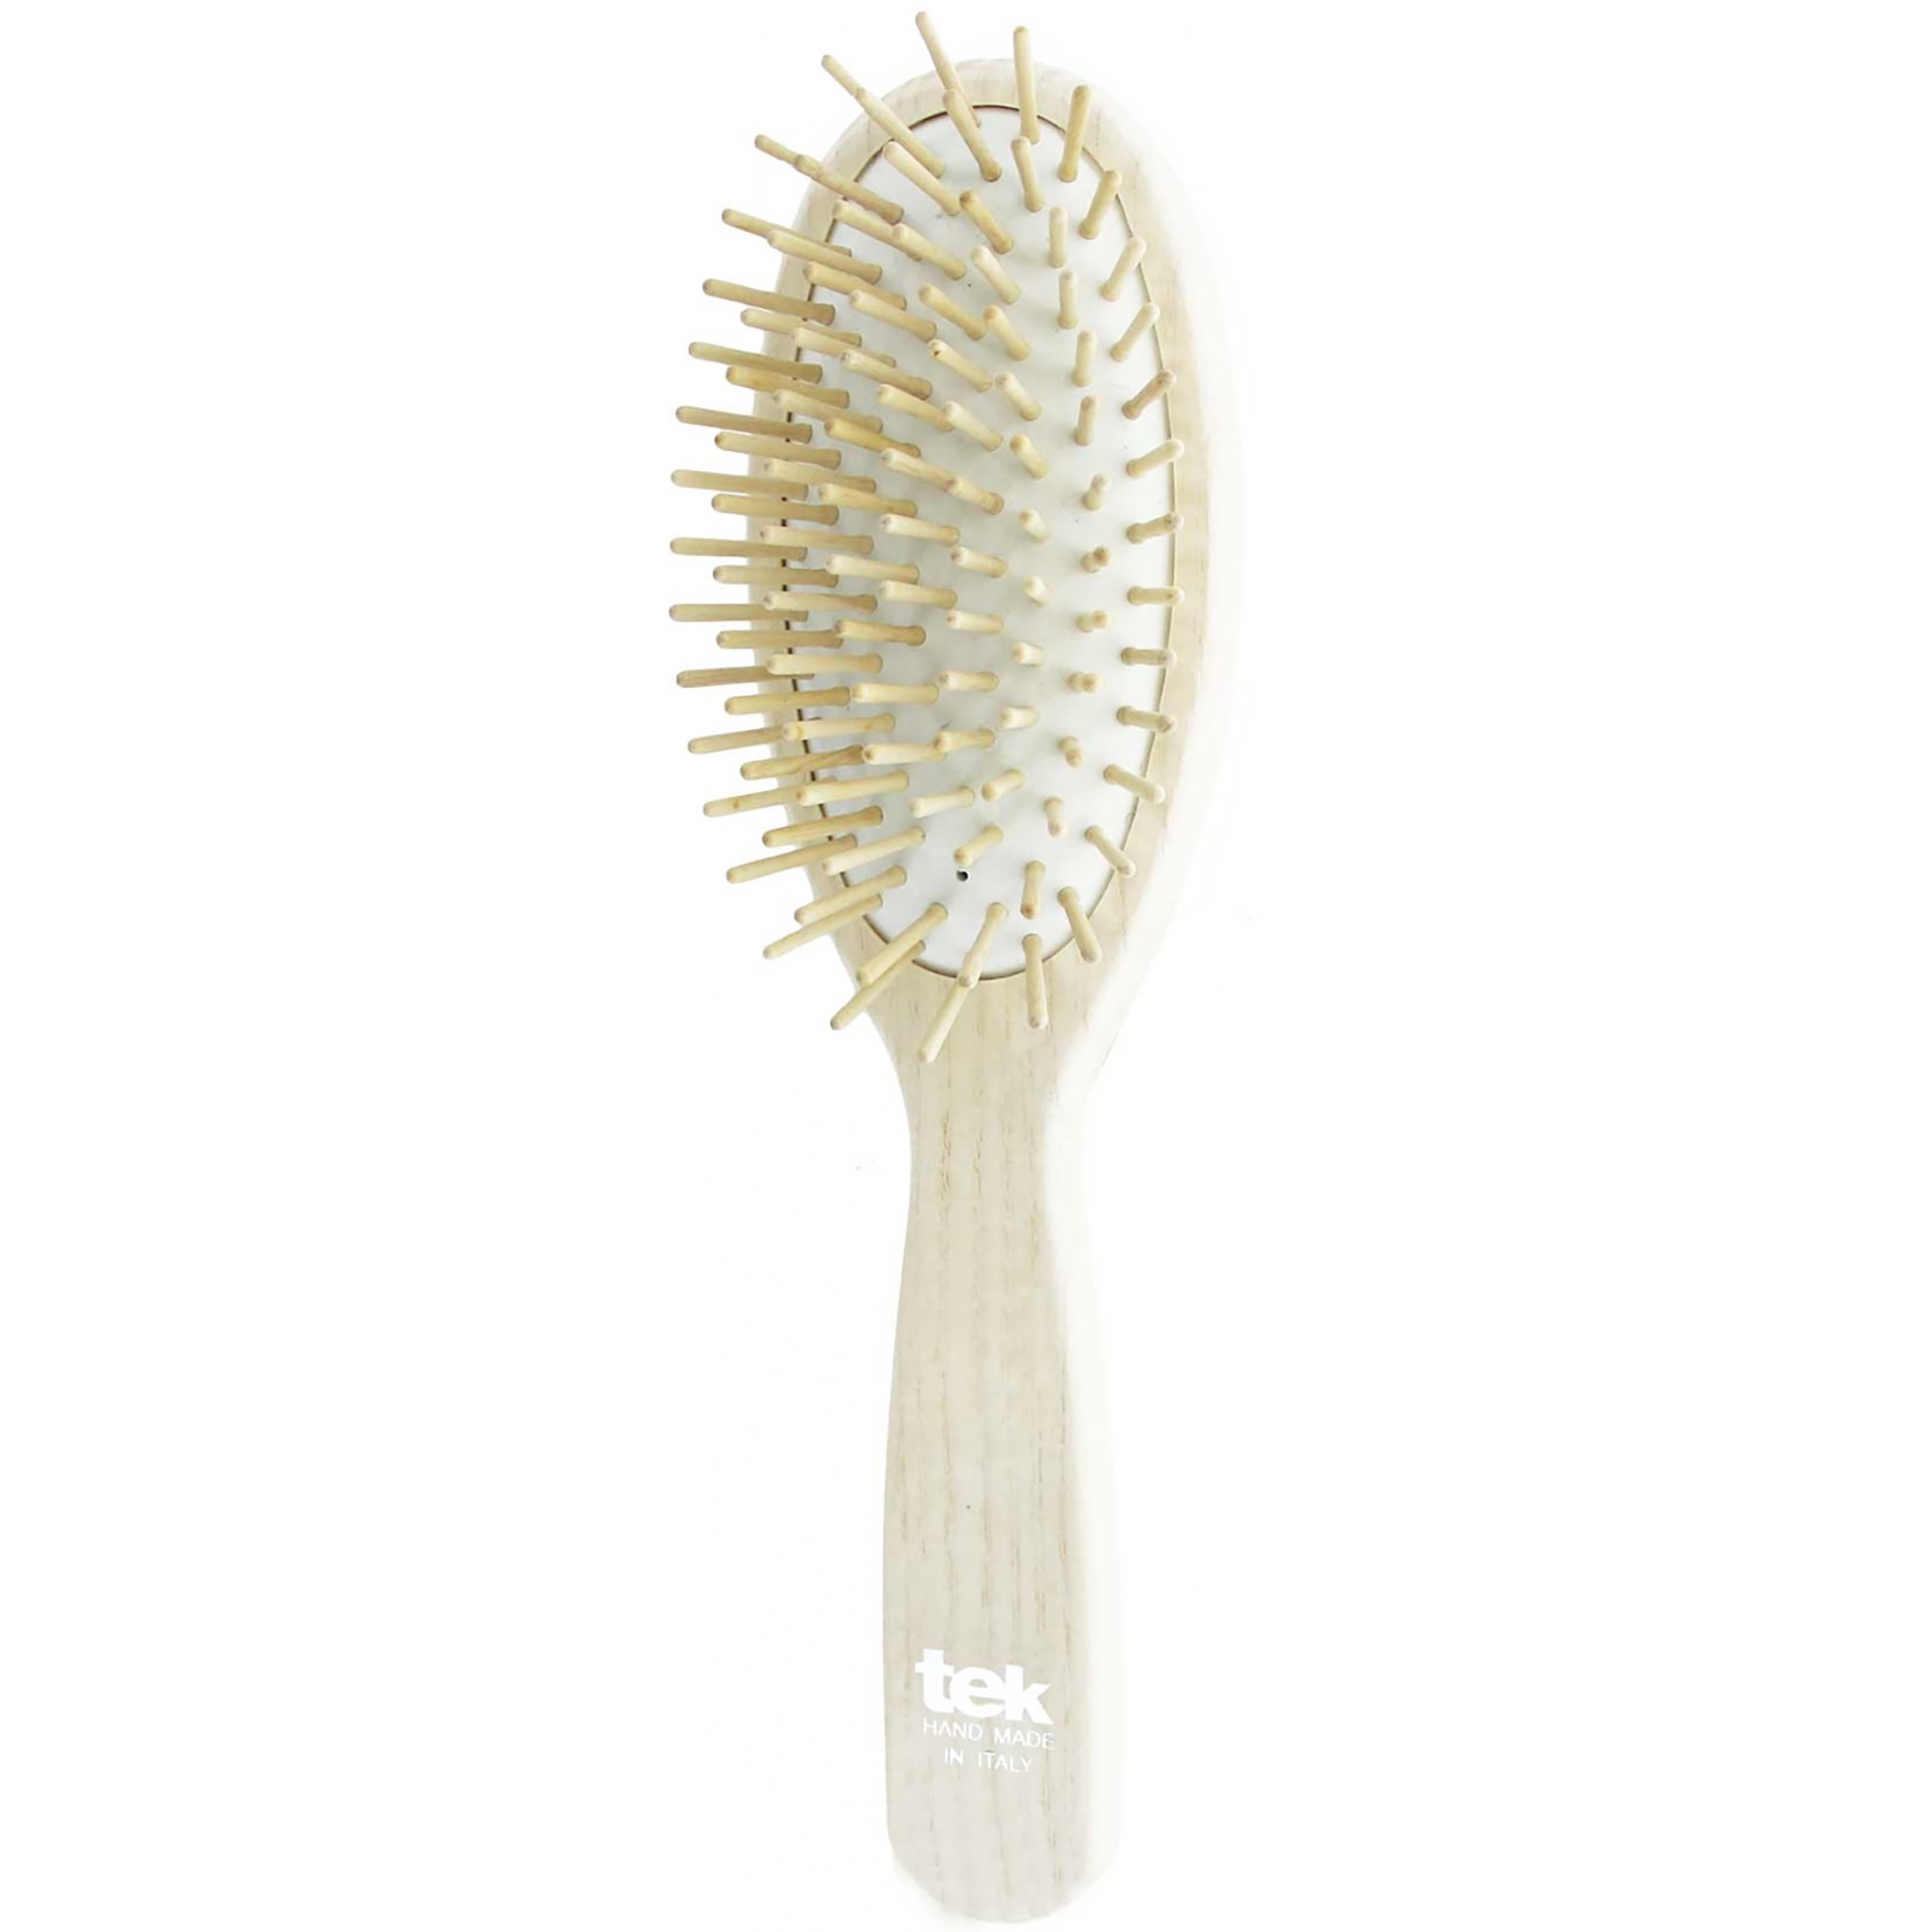 Tek Big Oval Brush With Short Wooden Pins Lacquered White White